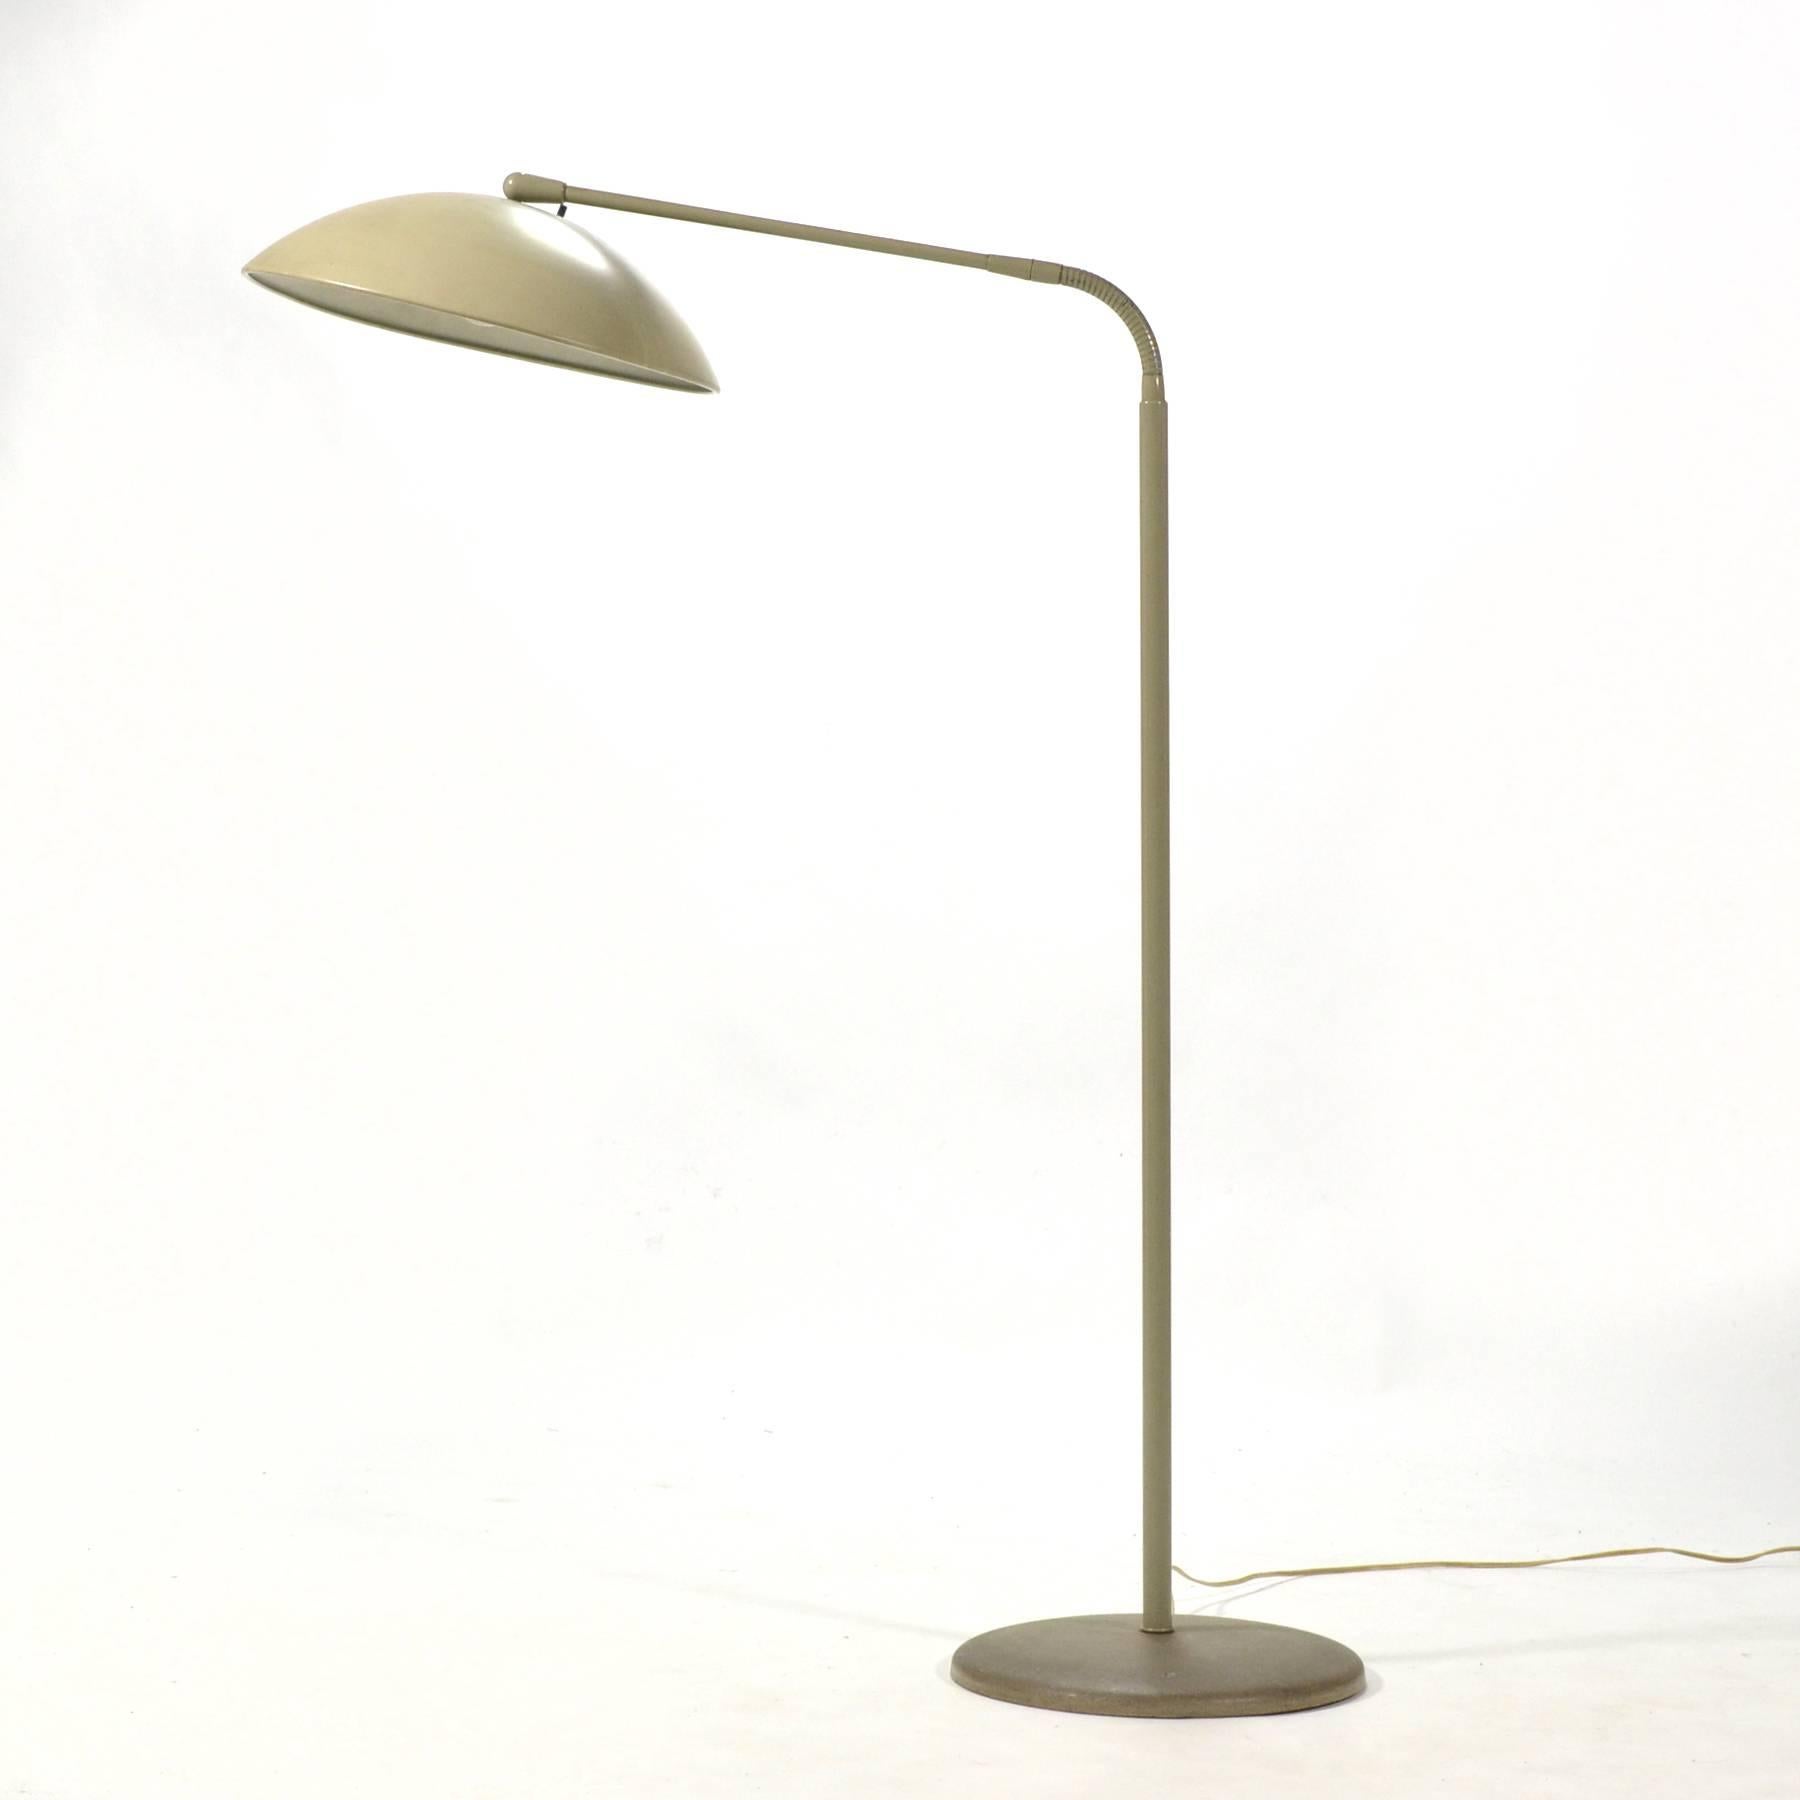 A post-war Classic, the Versen floor lamp is a study in simple, functional lighting. The adjustable neck and head allow it to be an ideal reading lamp, but it can also function as an uplight for soft, ambient light. This design was specified for